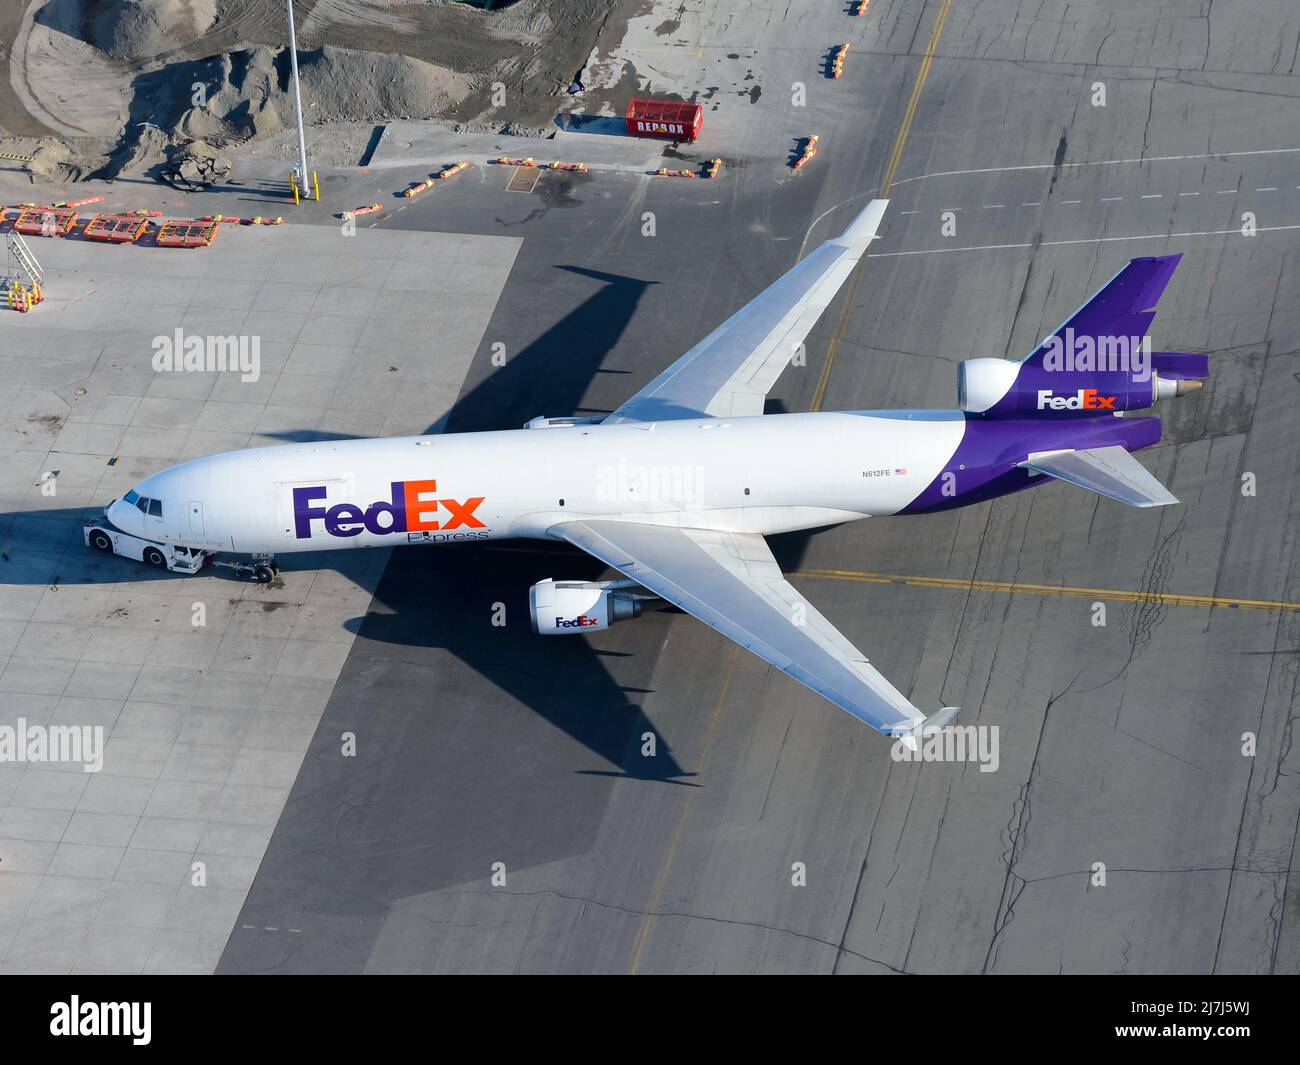 Fedex McDonnell Douglas MD-11 aircraft. Airplane MD11 for cargo transport for Federal Express. Stock Photo